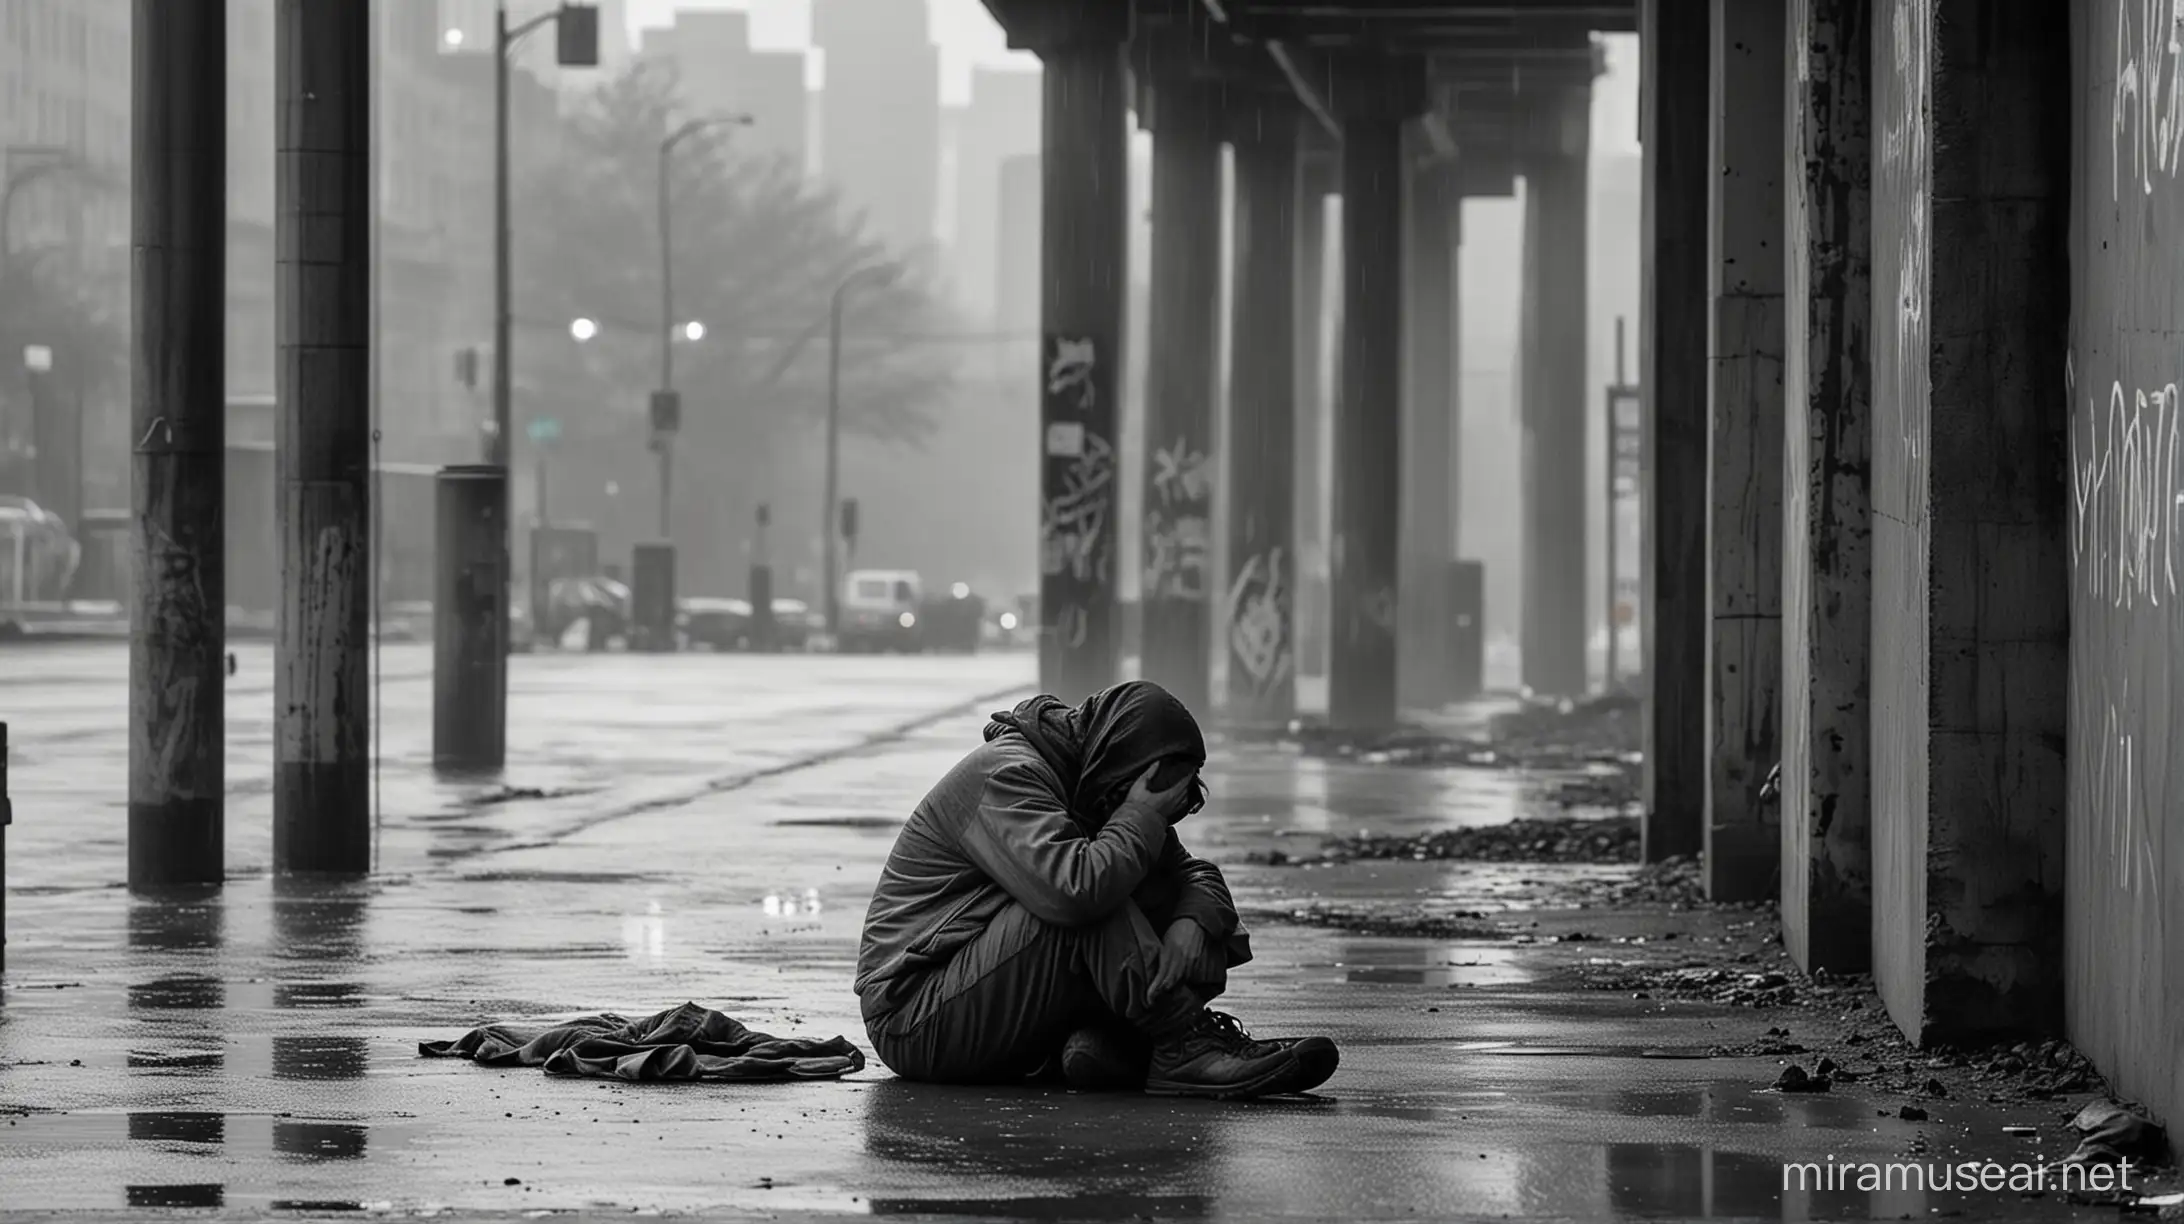 A color photo of a homeless woman huddled under a bridge in the rain, captured by a photojournalist using a telephoto lens. The lens size should be 200mm, the aperture setting f/4.5, and the ISO 1600. The lighting should be dim and gloomy, with the rain creating a soft blur effect. The emotional context should be sad and desperate, conveying the loneliness and isolation of homelessness. The setting should be a desolate urban environment, with graffiti-covered walls and abandoned buildings in the background. The art medium should be color photography.